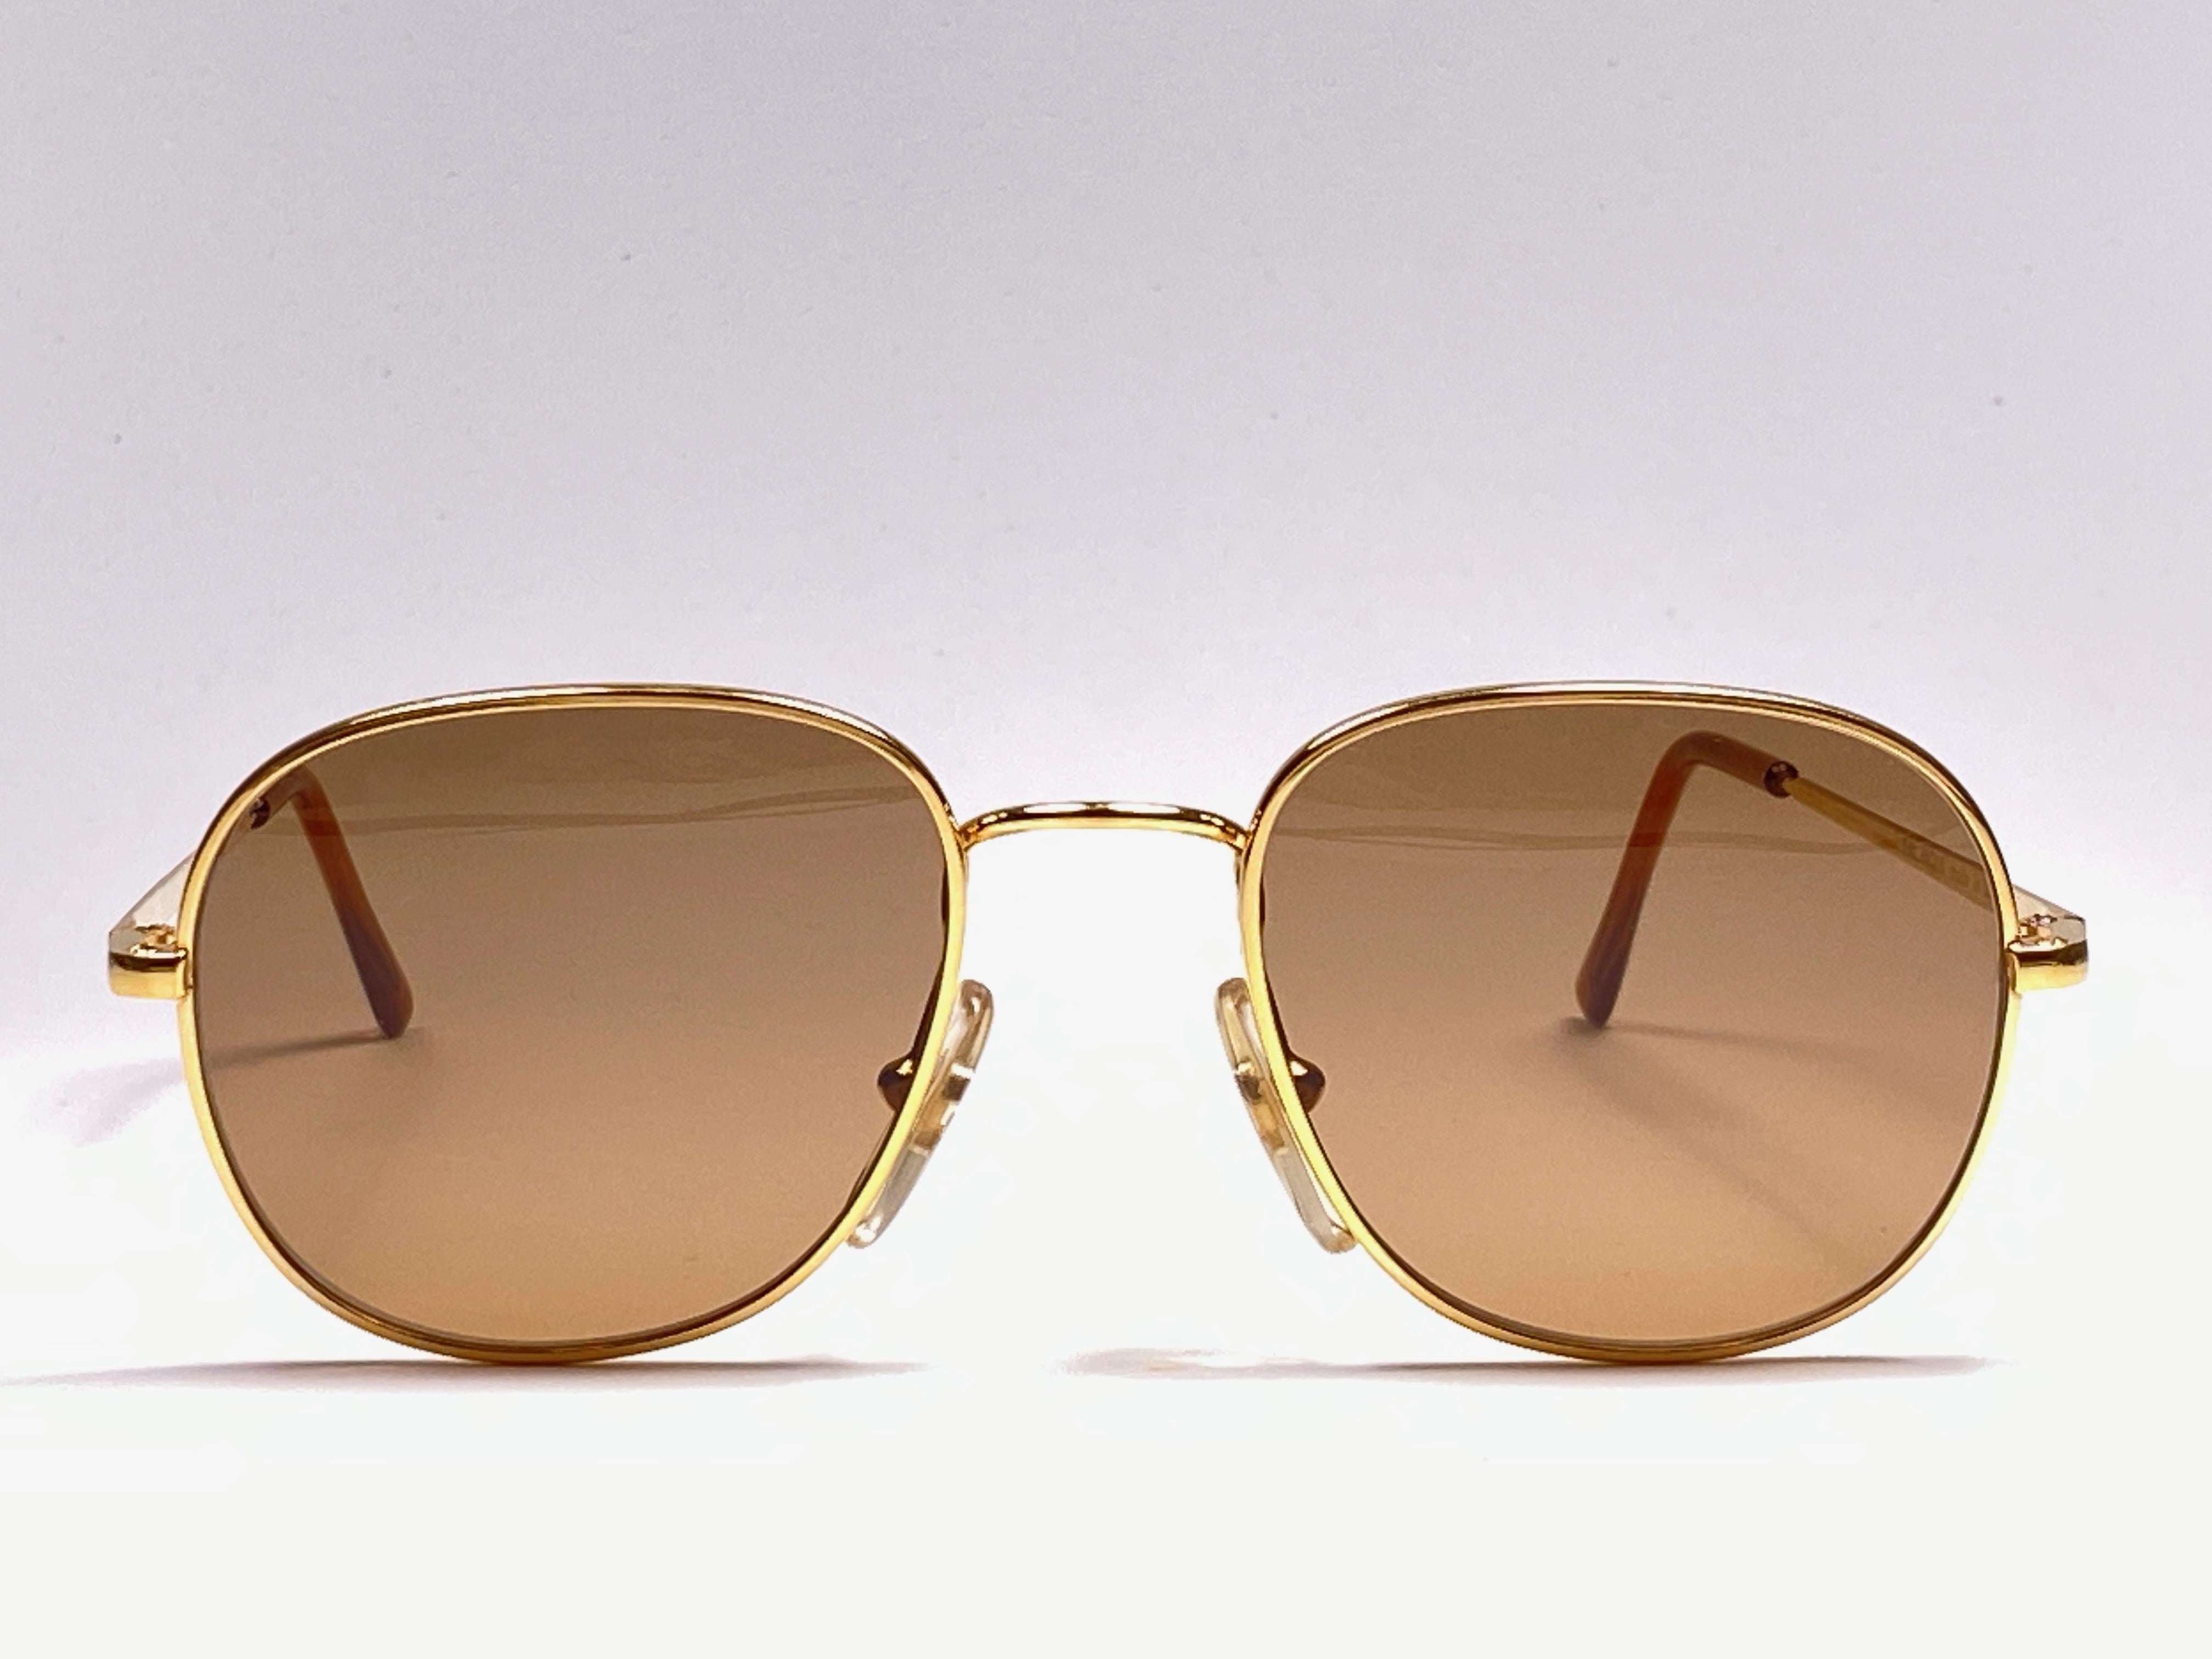 New Vintage Moschino medium size gold frame

Spotless gold mirrored lenses.

Made in Italy.
 
Produced and design in 1990's.

This item may show minor sign of wear due to storage.